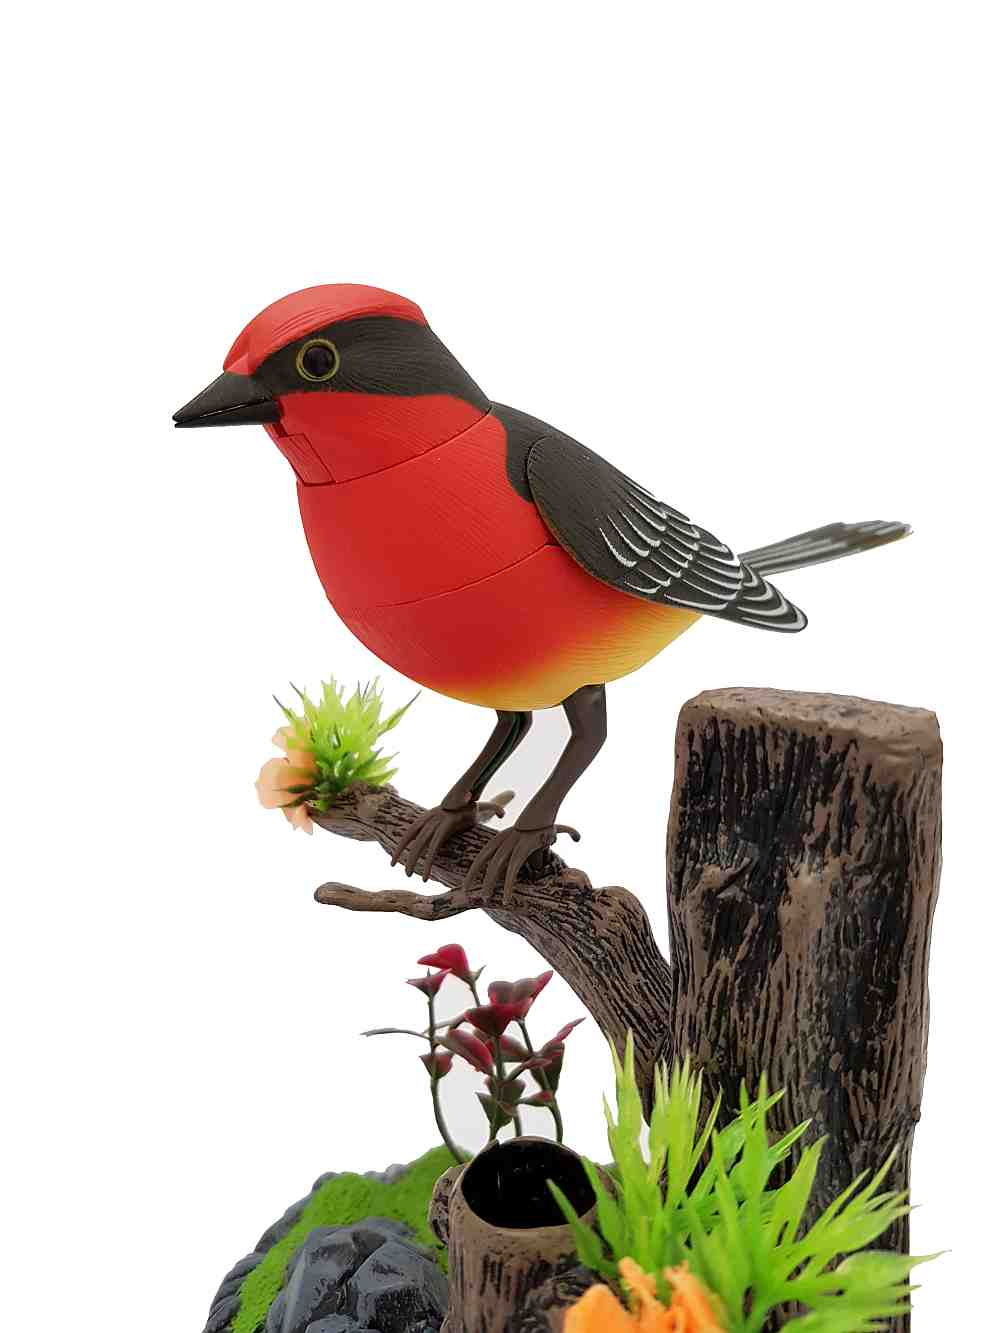 Sound Control Singing Bird Red Bird Electric Voice-Activated Bird Pets Christmas Gift Birthday Gift for Kids